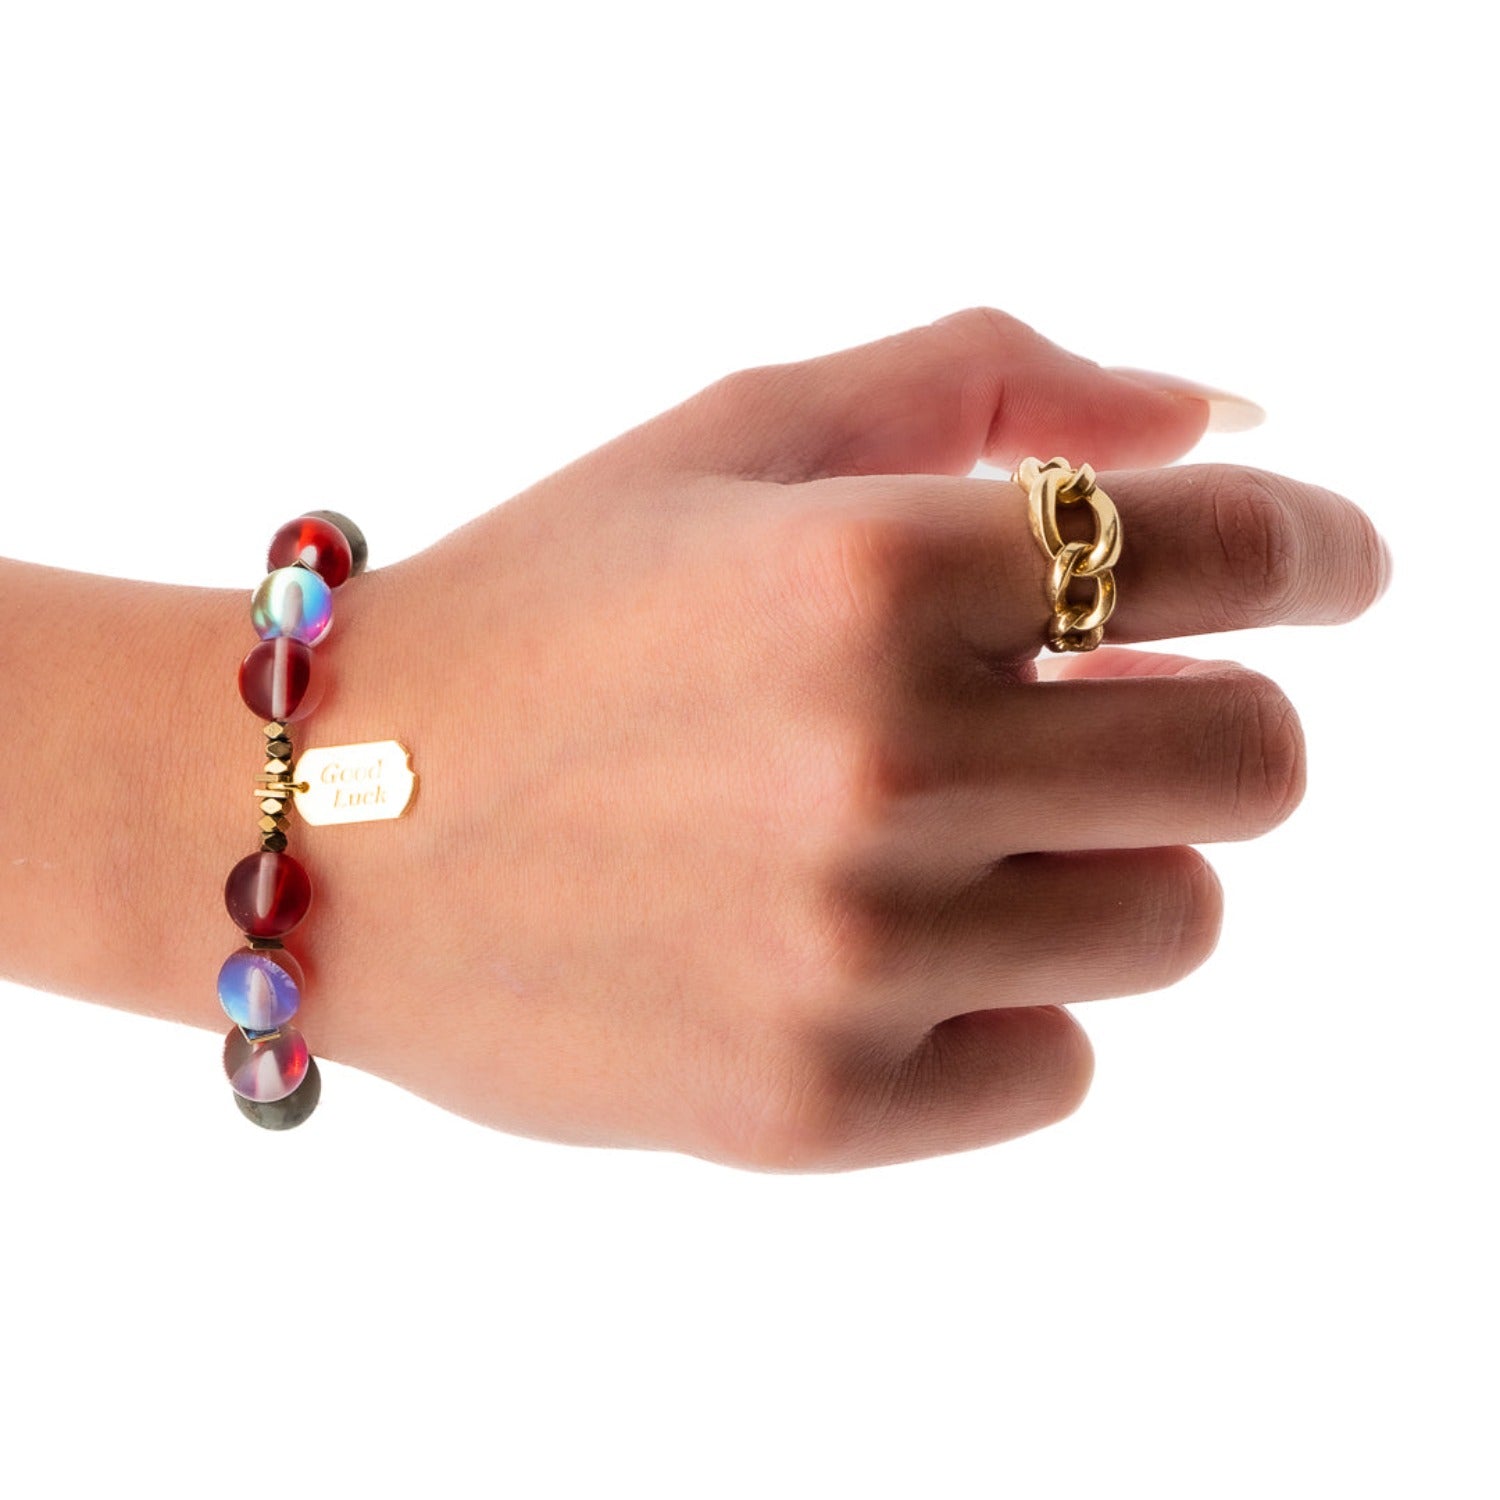 See how the Red & Gold Good Luck Bracelet enhances the model's hand, adding a touch of sophistication and charm.